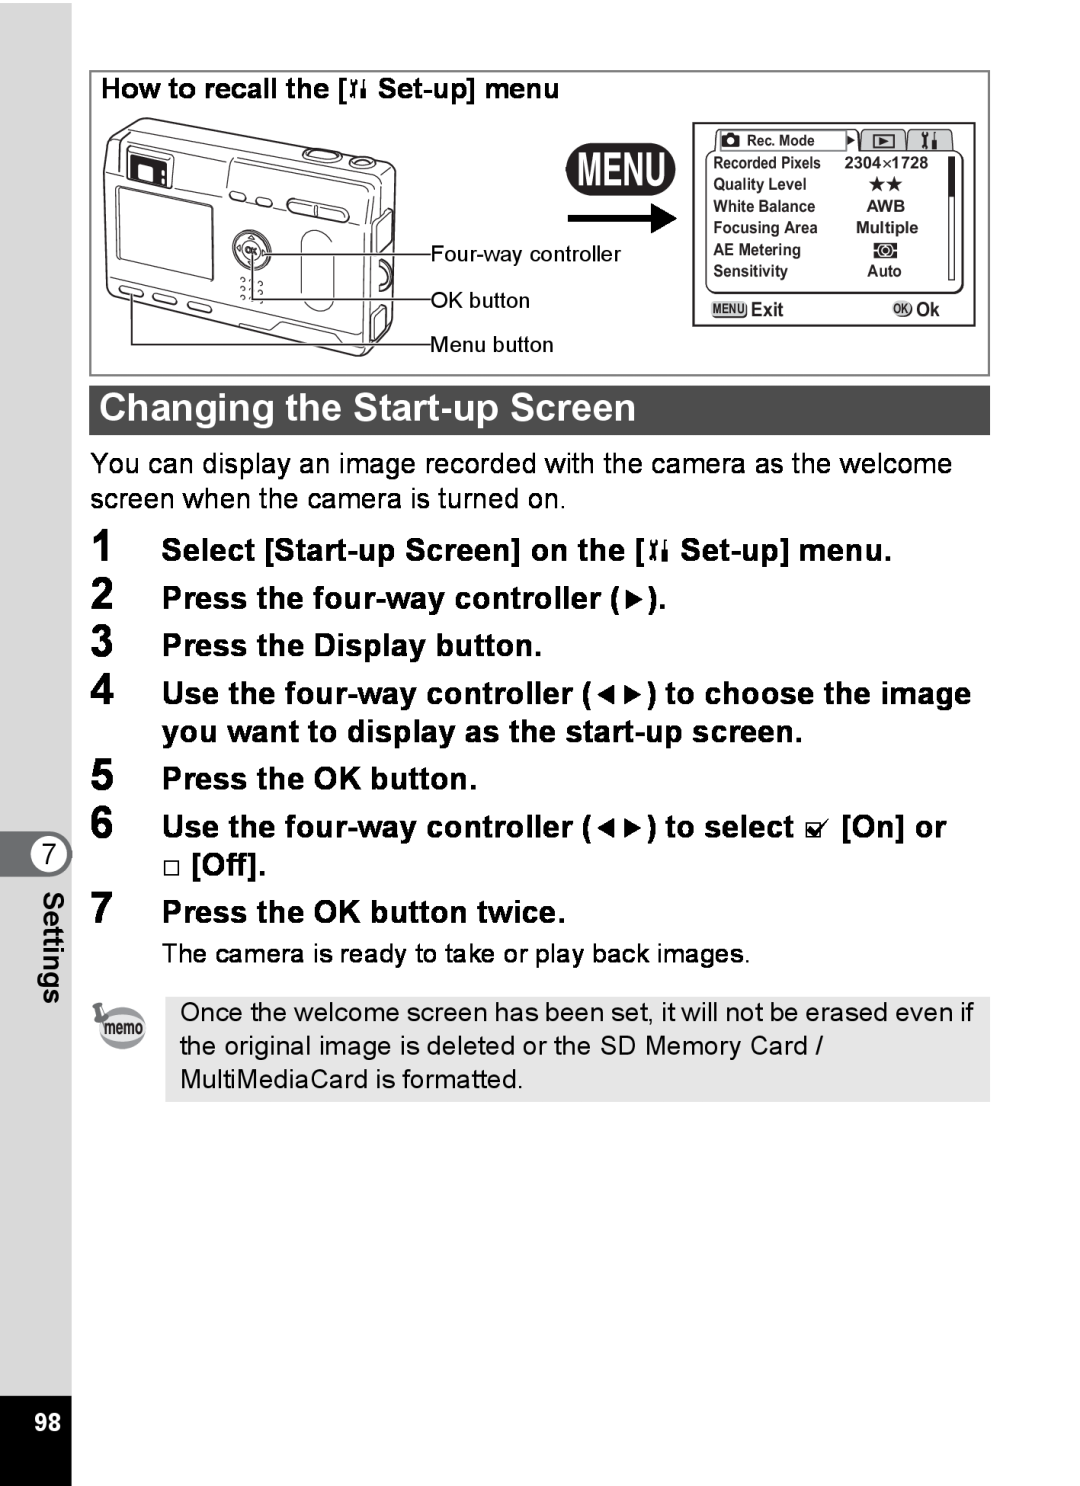 Pentax S4 manual Changing the Start-up Screen, Select Start-up Screen on the B Set-up menu, Press the OK button twice 